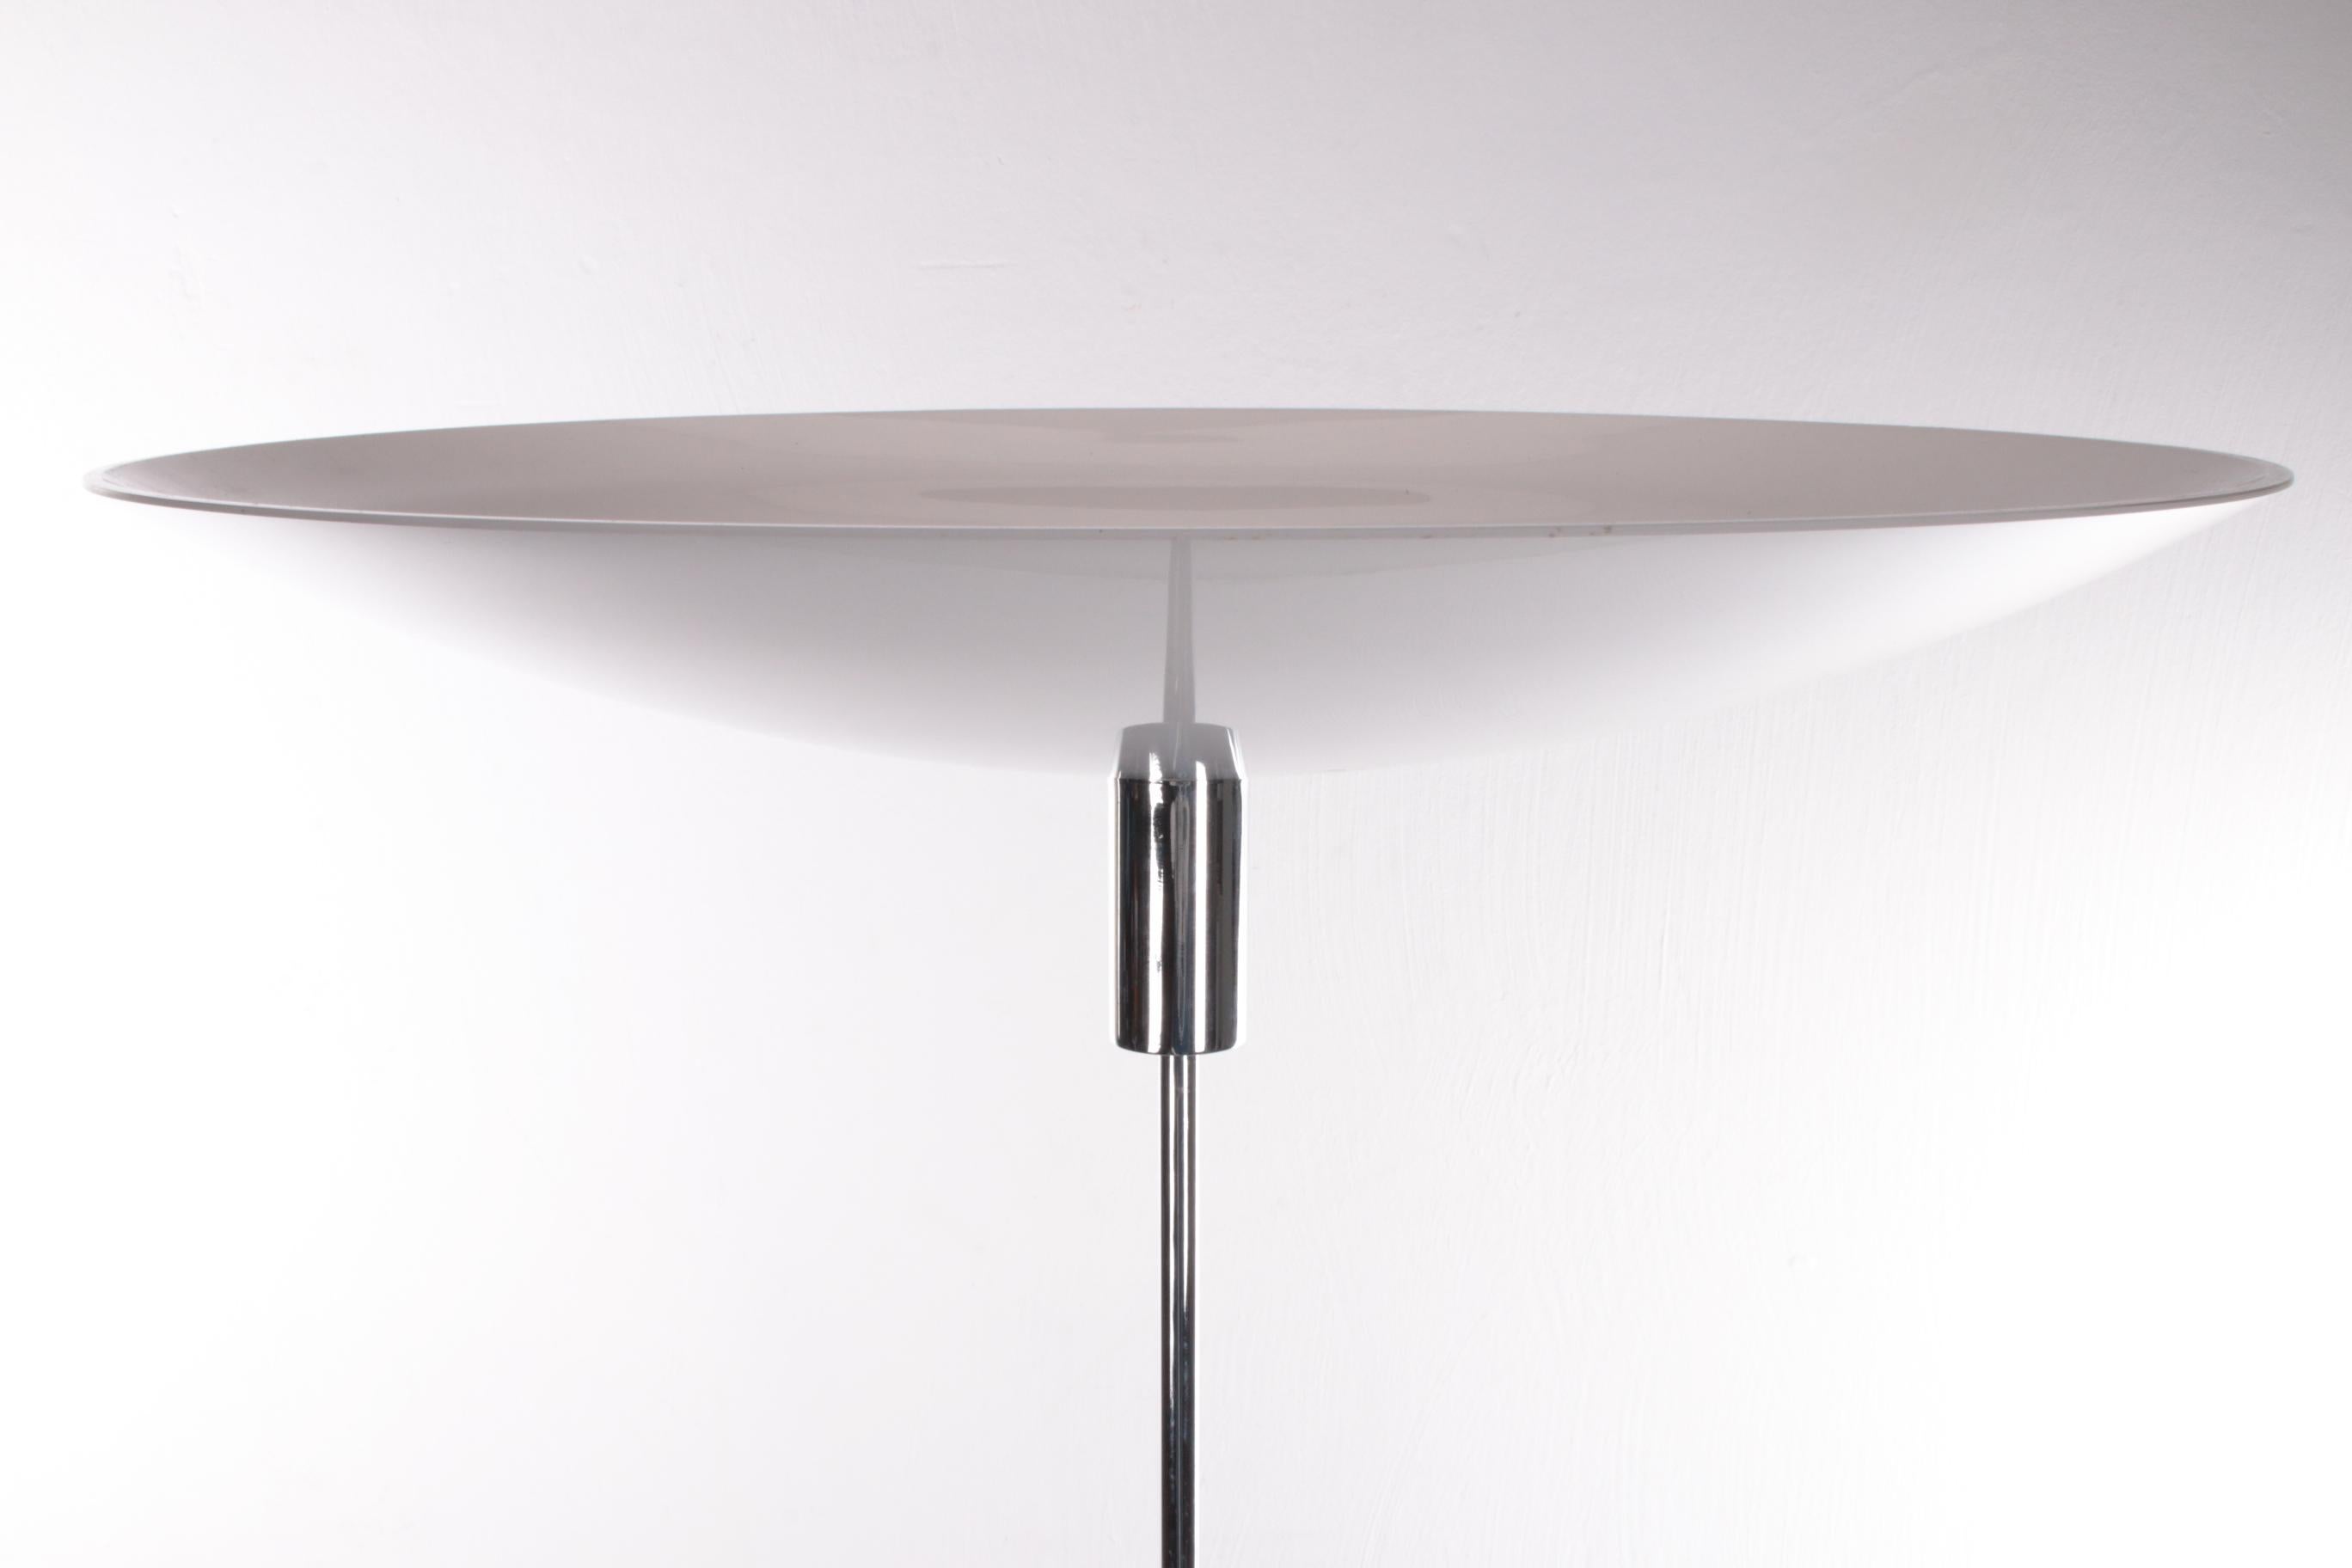 Space Age VeArt Italy Artemide Floor Lamp Design by Jeannot Cerutti For Sale